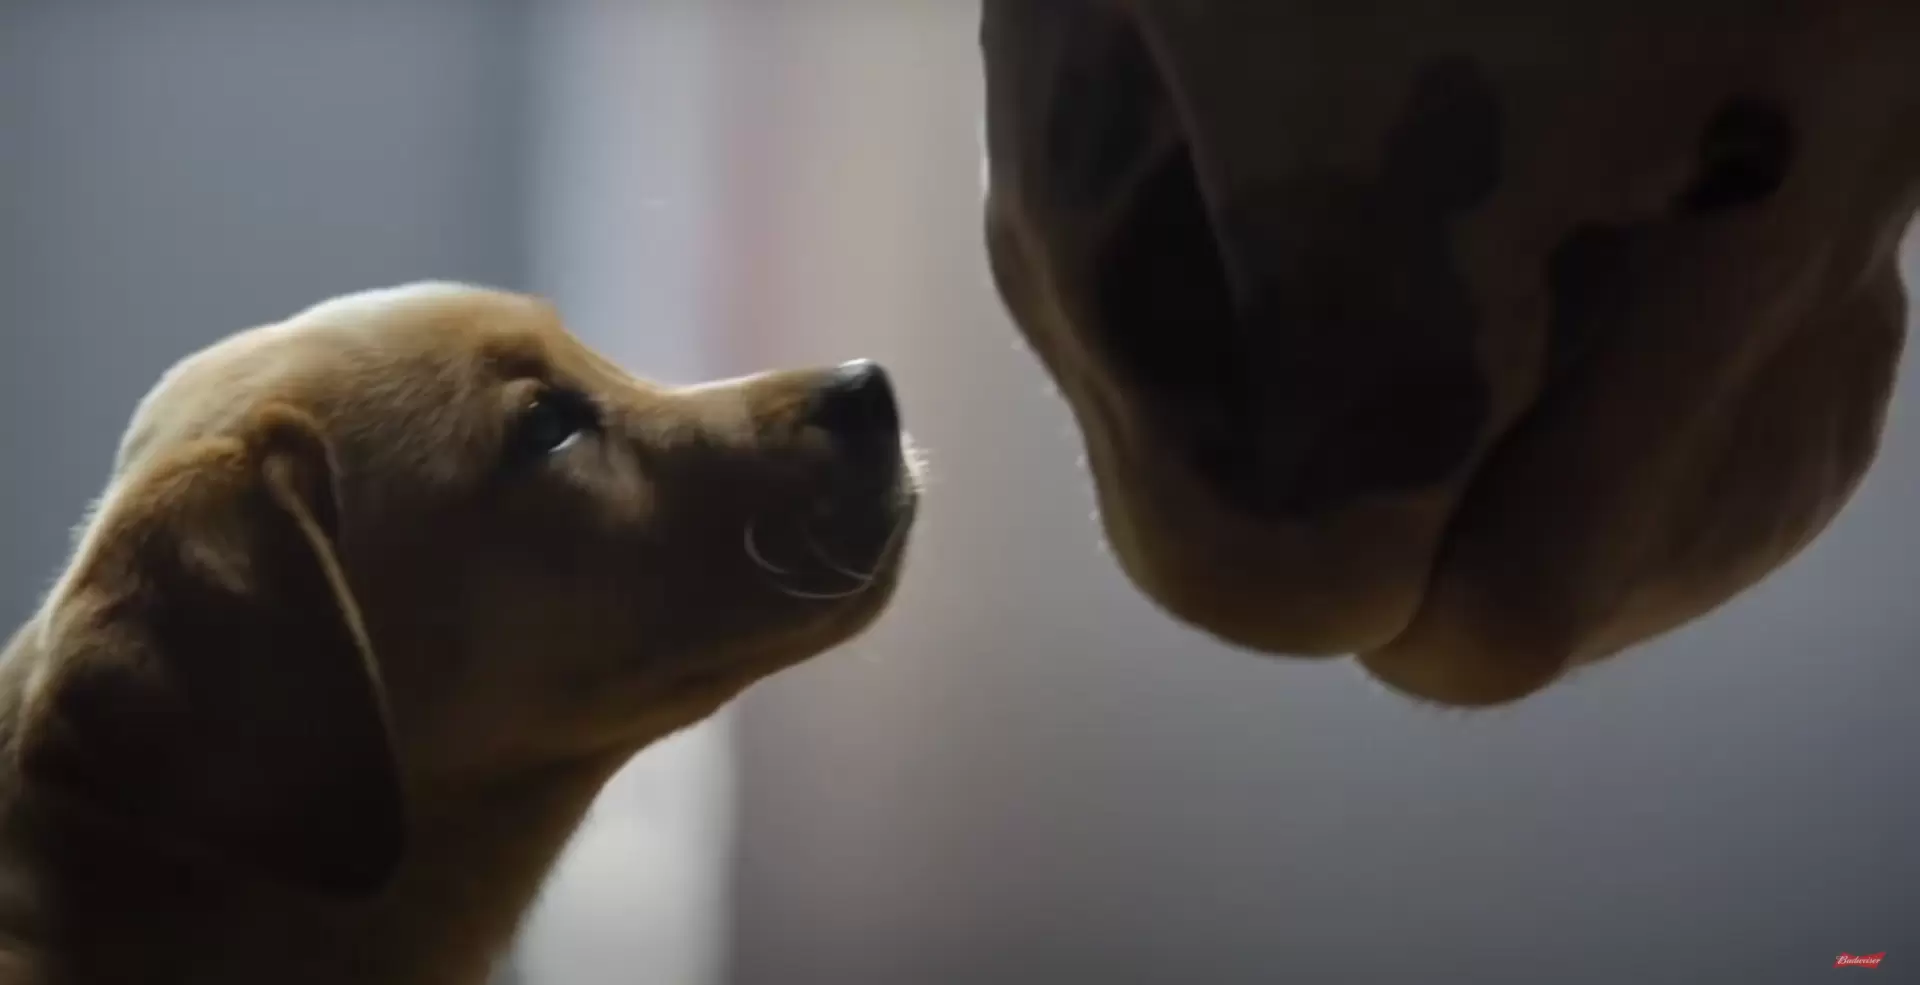 cute animals in budweiser advertising campaign